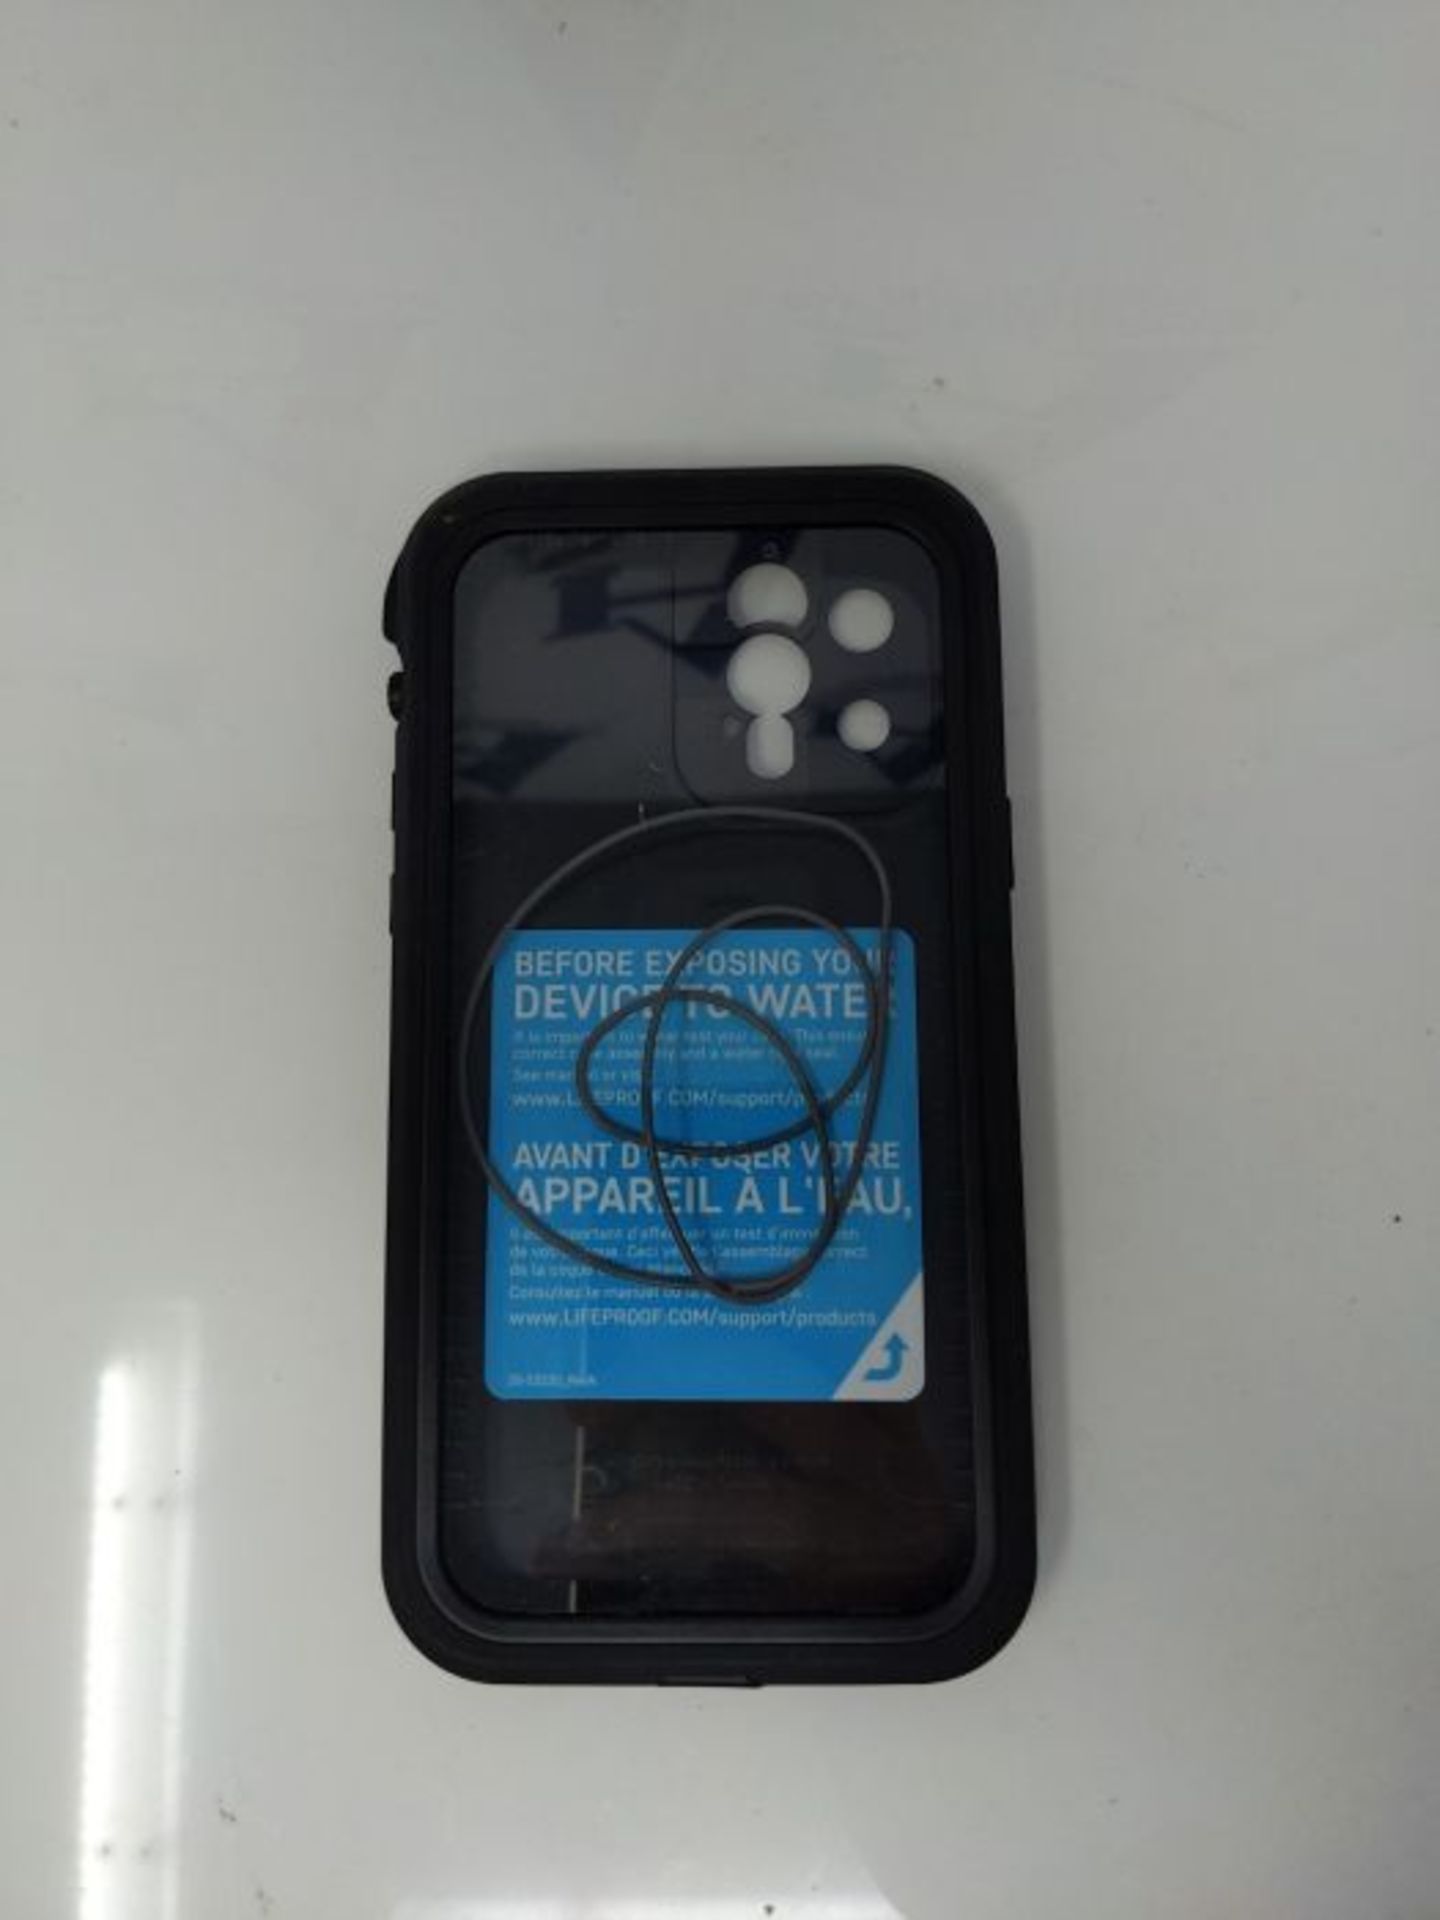 LifeProof for iPhone 12 Pro, Waterproof Drop Protective Case, Fre Series, Black - Image 3 of 6